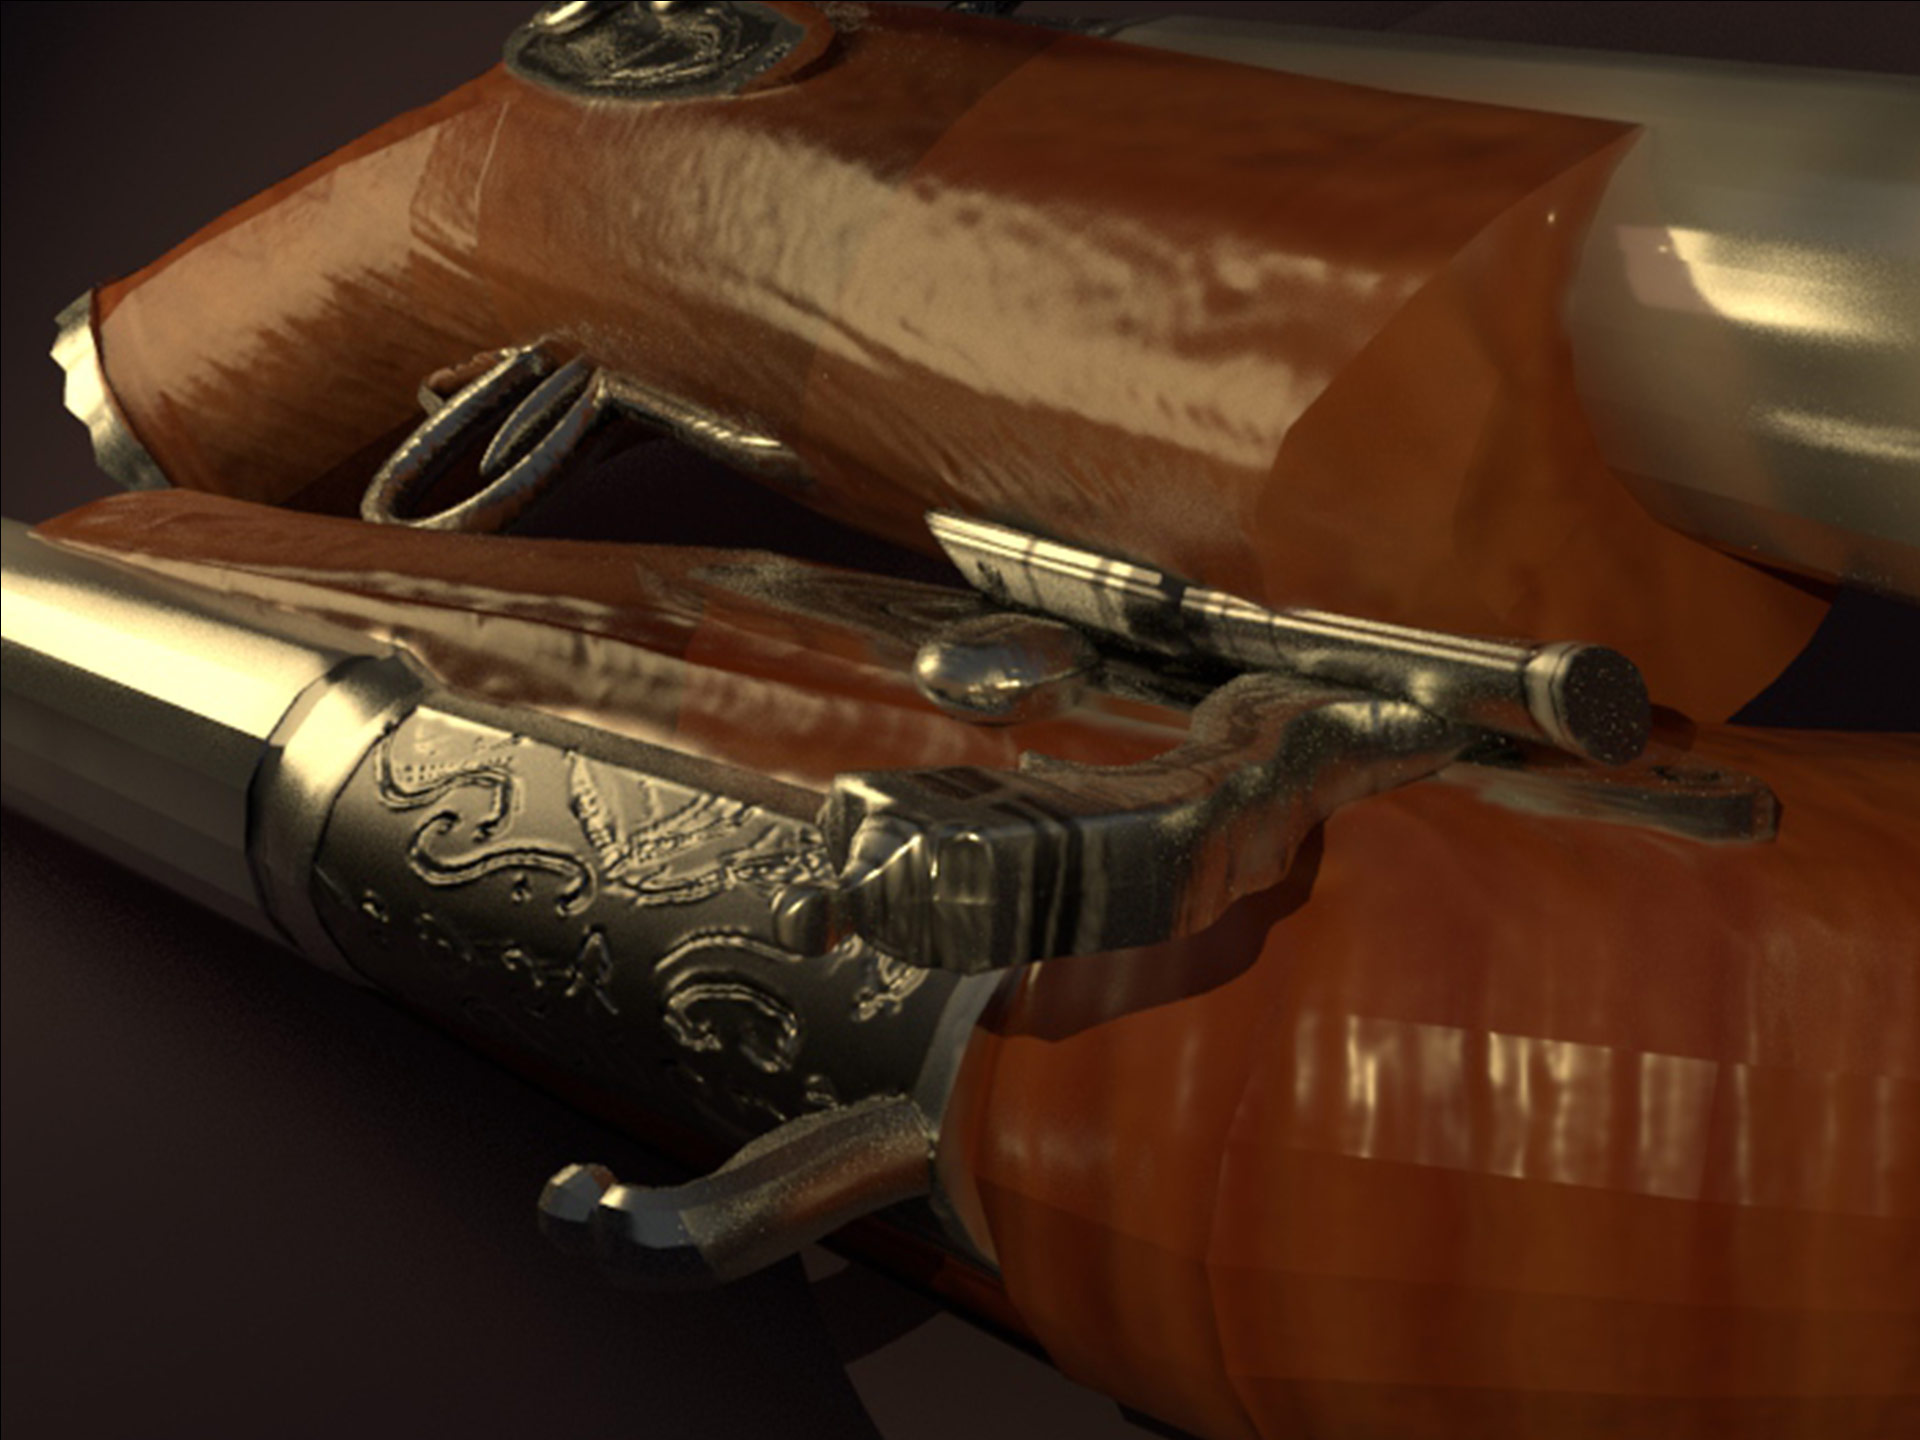 A crop of a closeup shot of a pair of 18th century flintlock pistols. The engraved pattern on the metal piece on top of the gun is visible.